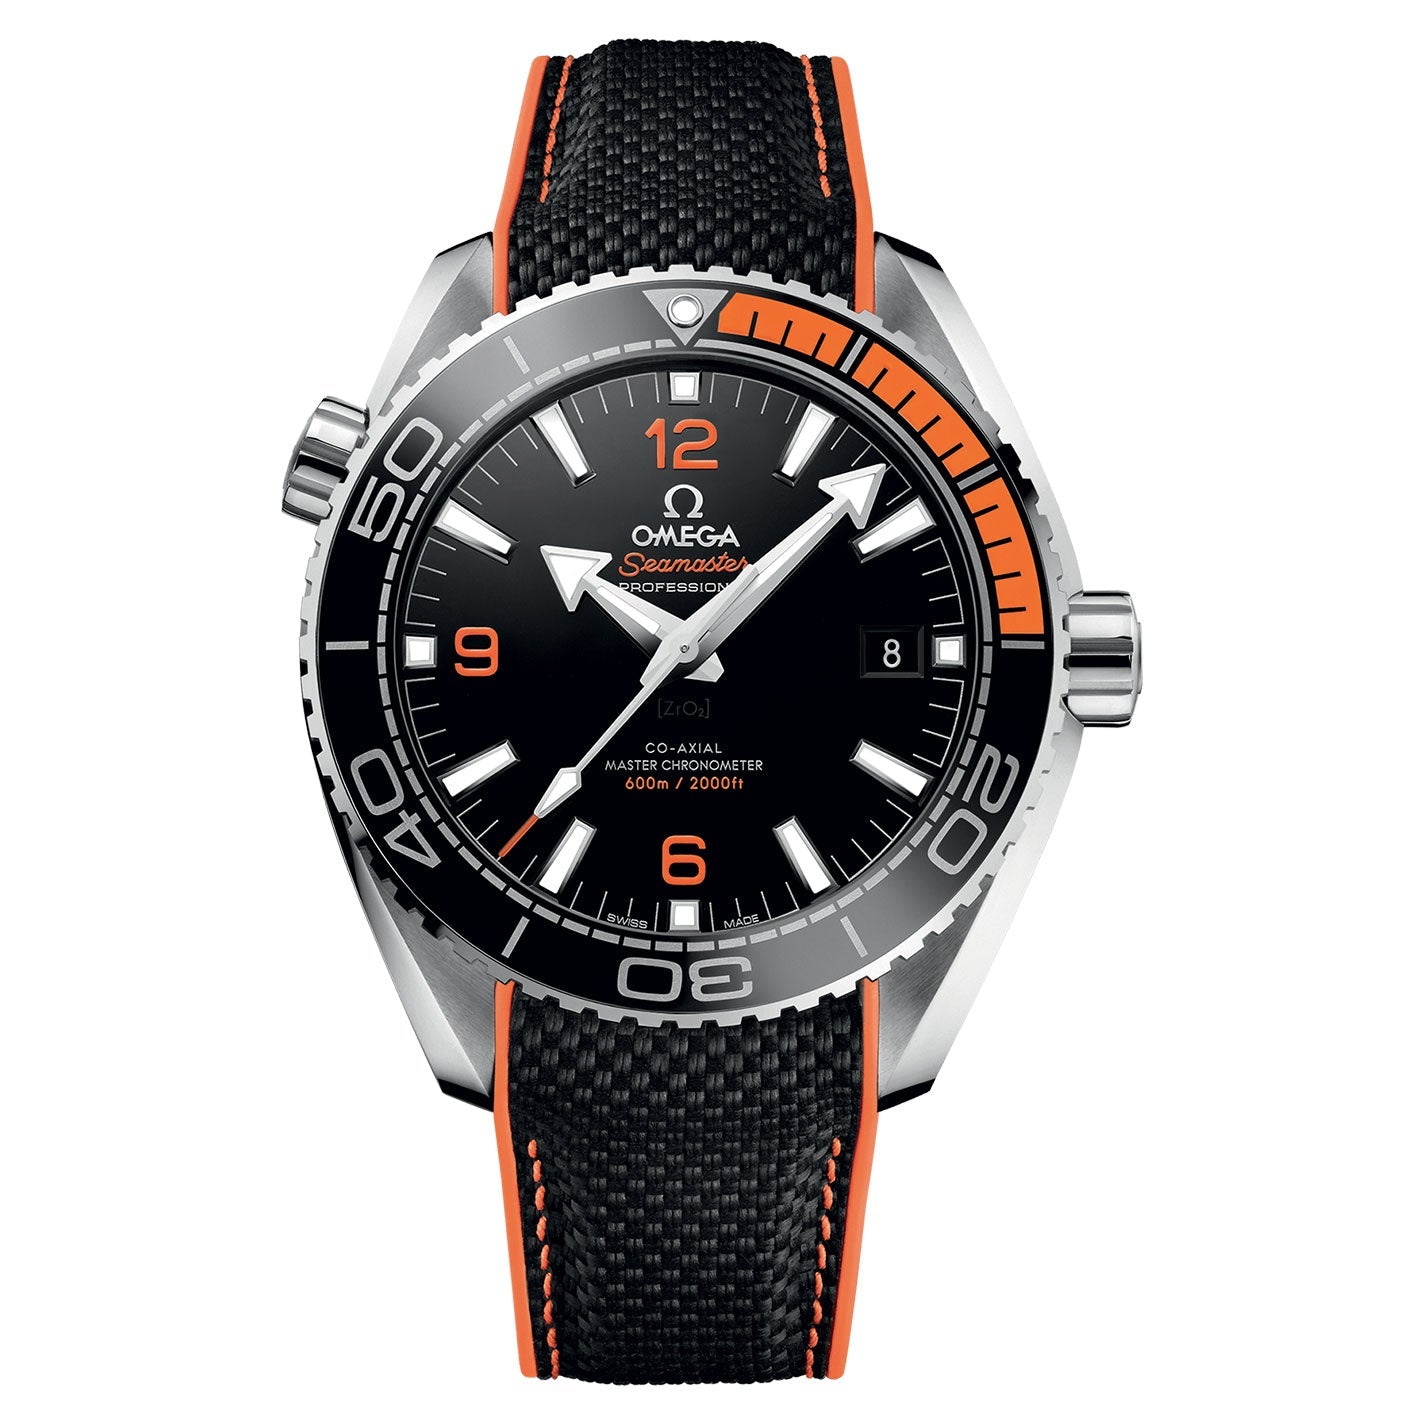 OMEGA Seamaster Planet Ocean 600M Co-Axial Master Chronometer 43.5mm Watch